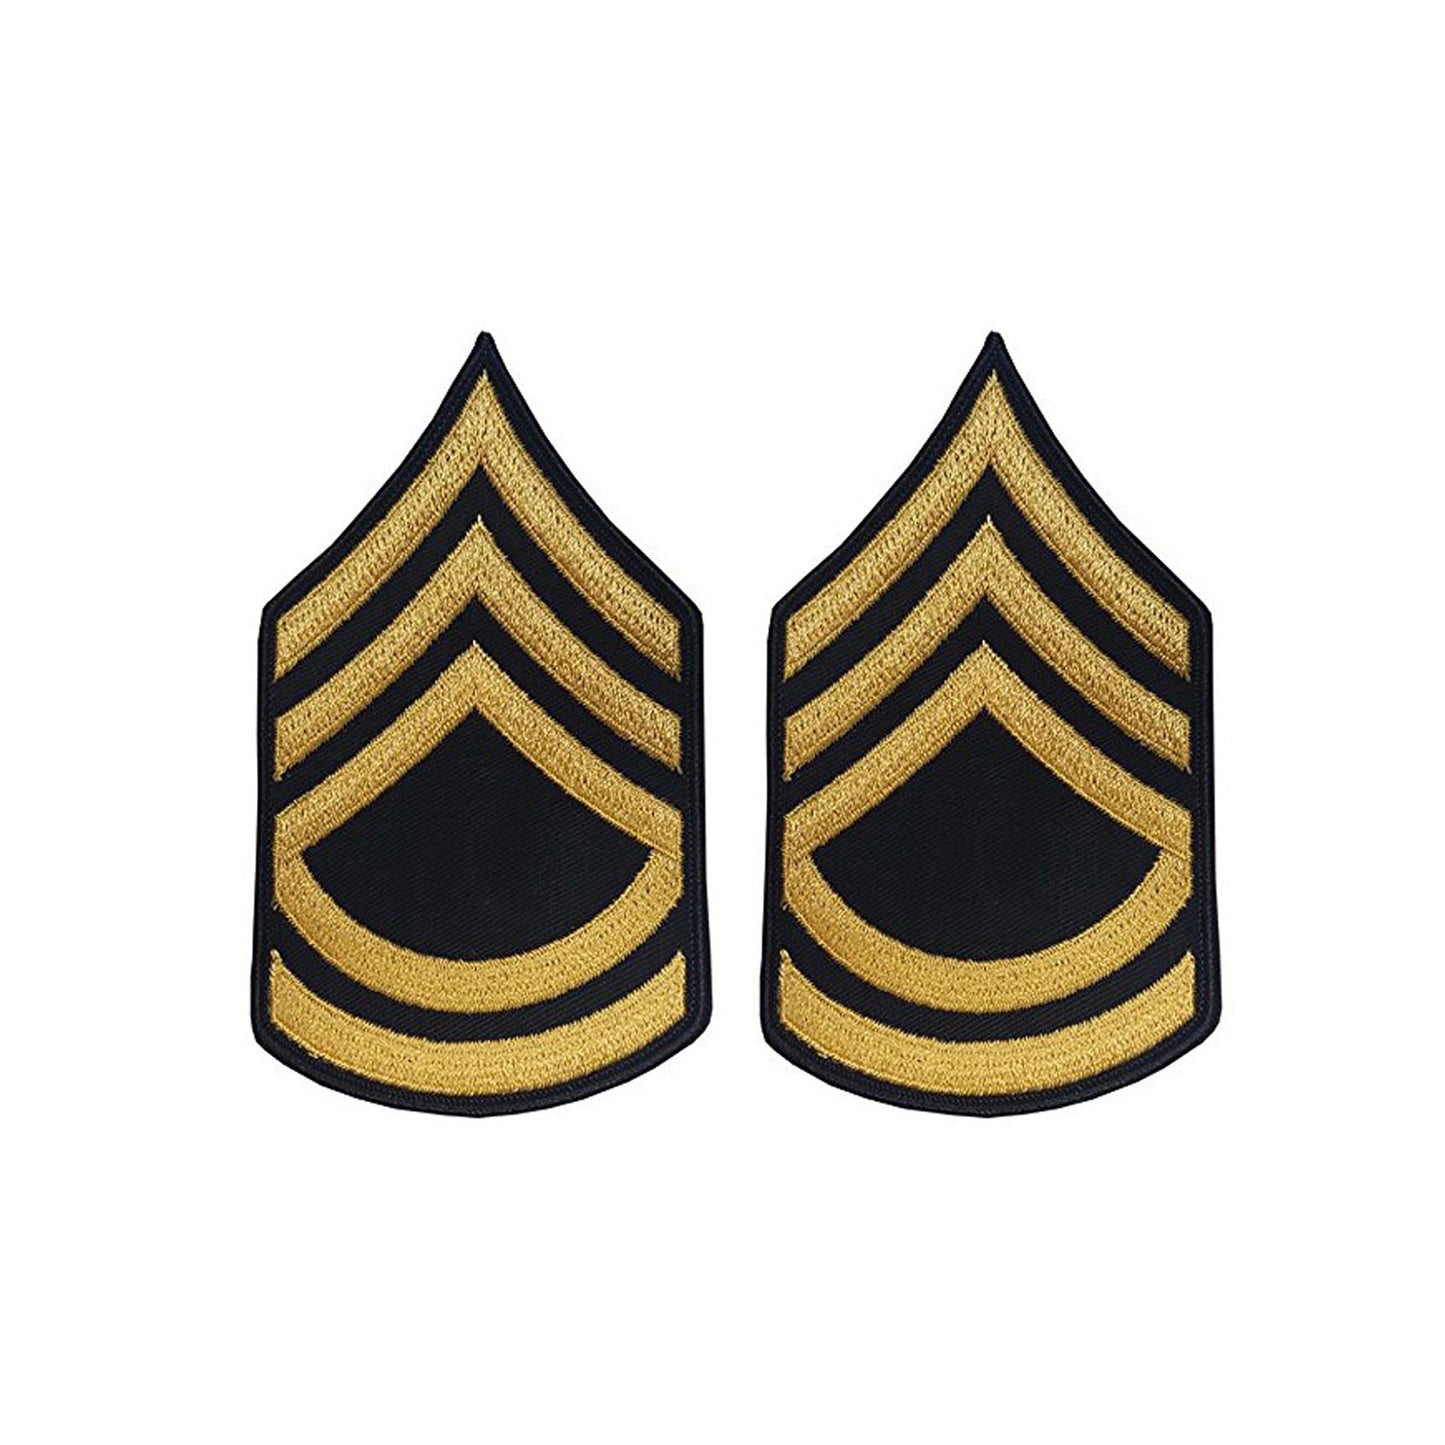 U.S. Army E7 Sergeant First Class Gold on Blue Sew-on - Large/Male